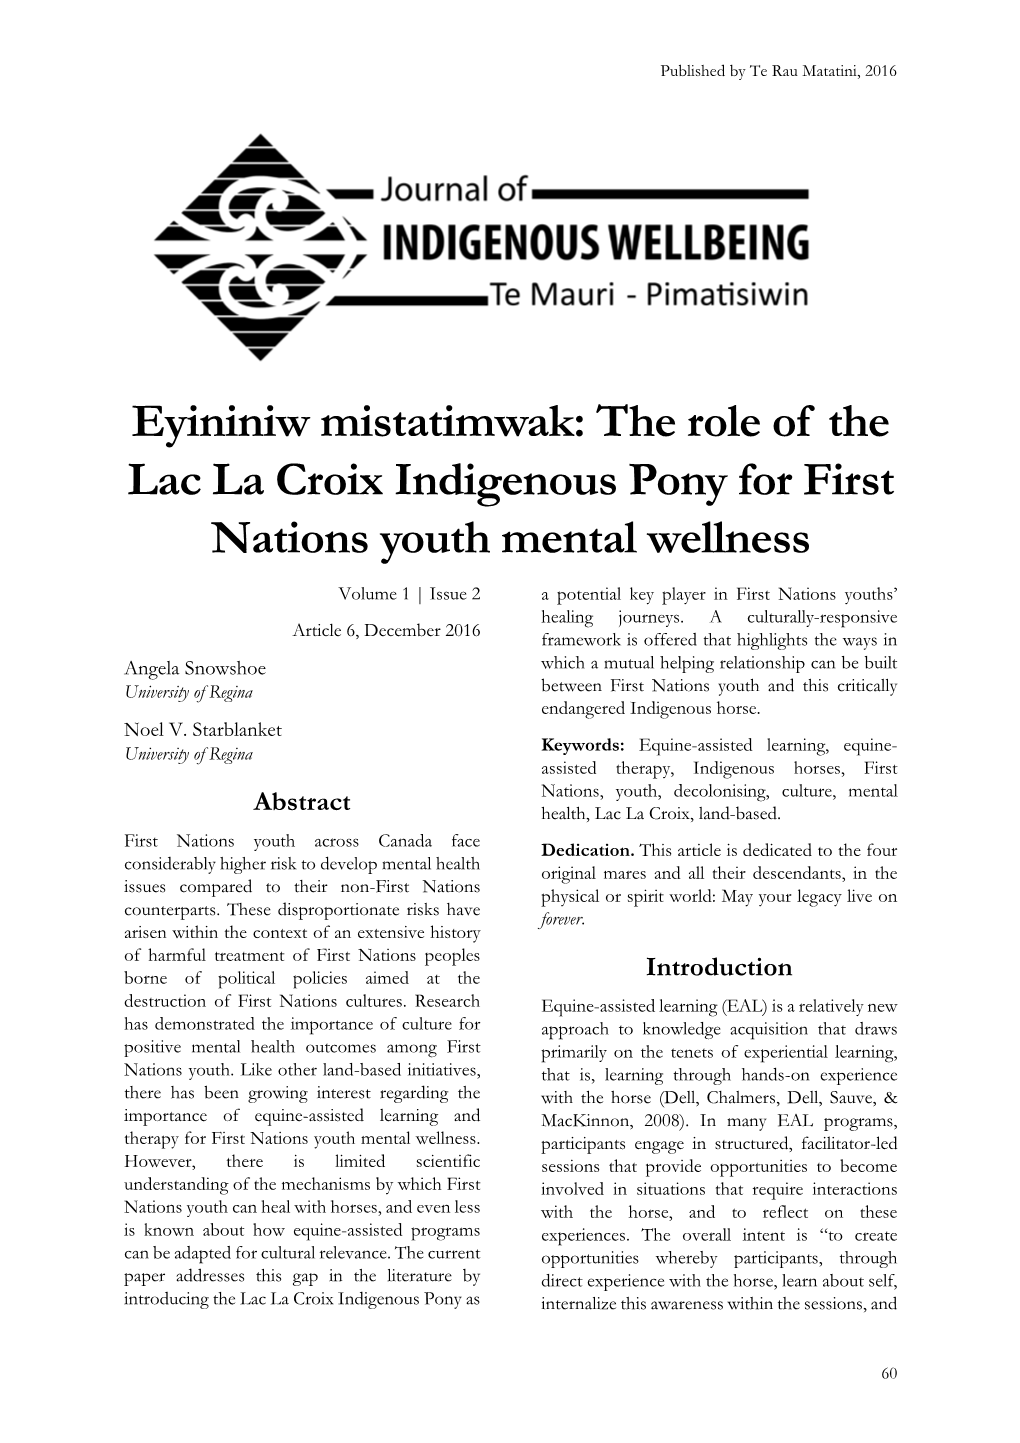 Eyininiw Mistatimwak: the Role of the Lac La Croix Indigenous Pony for First Nations Youth Mental Wellness